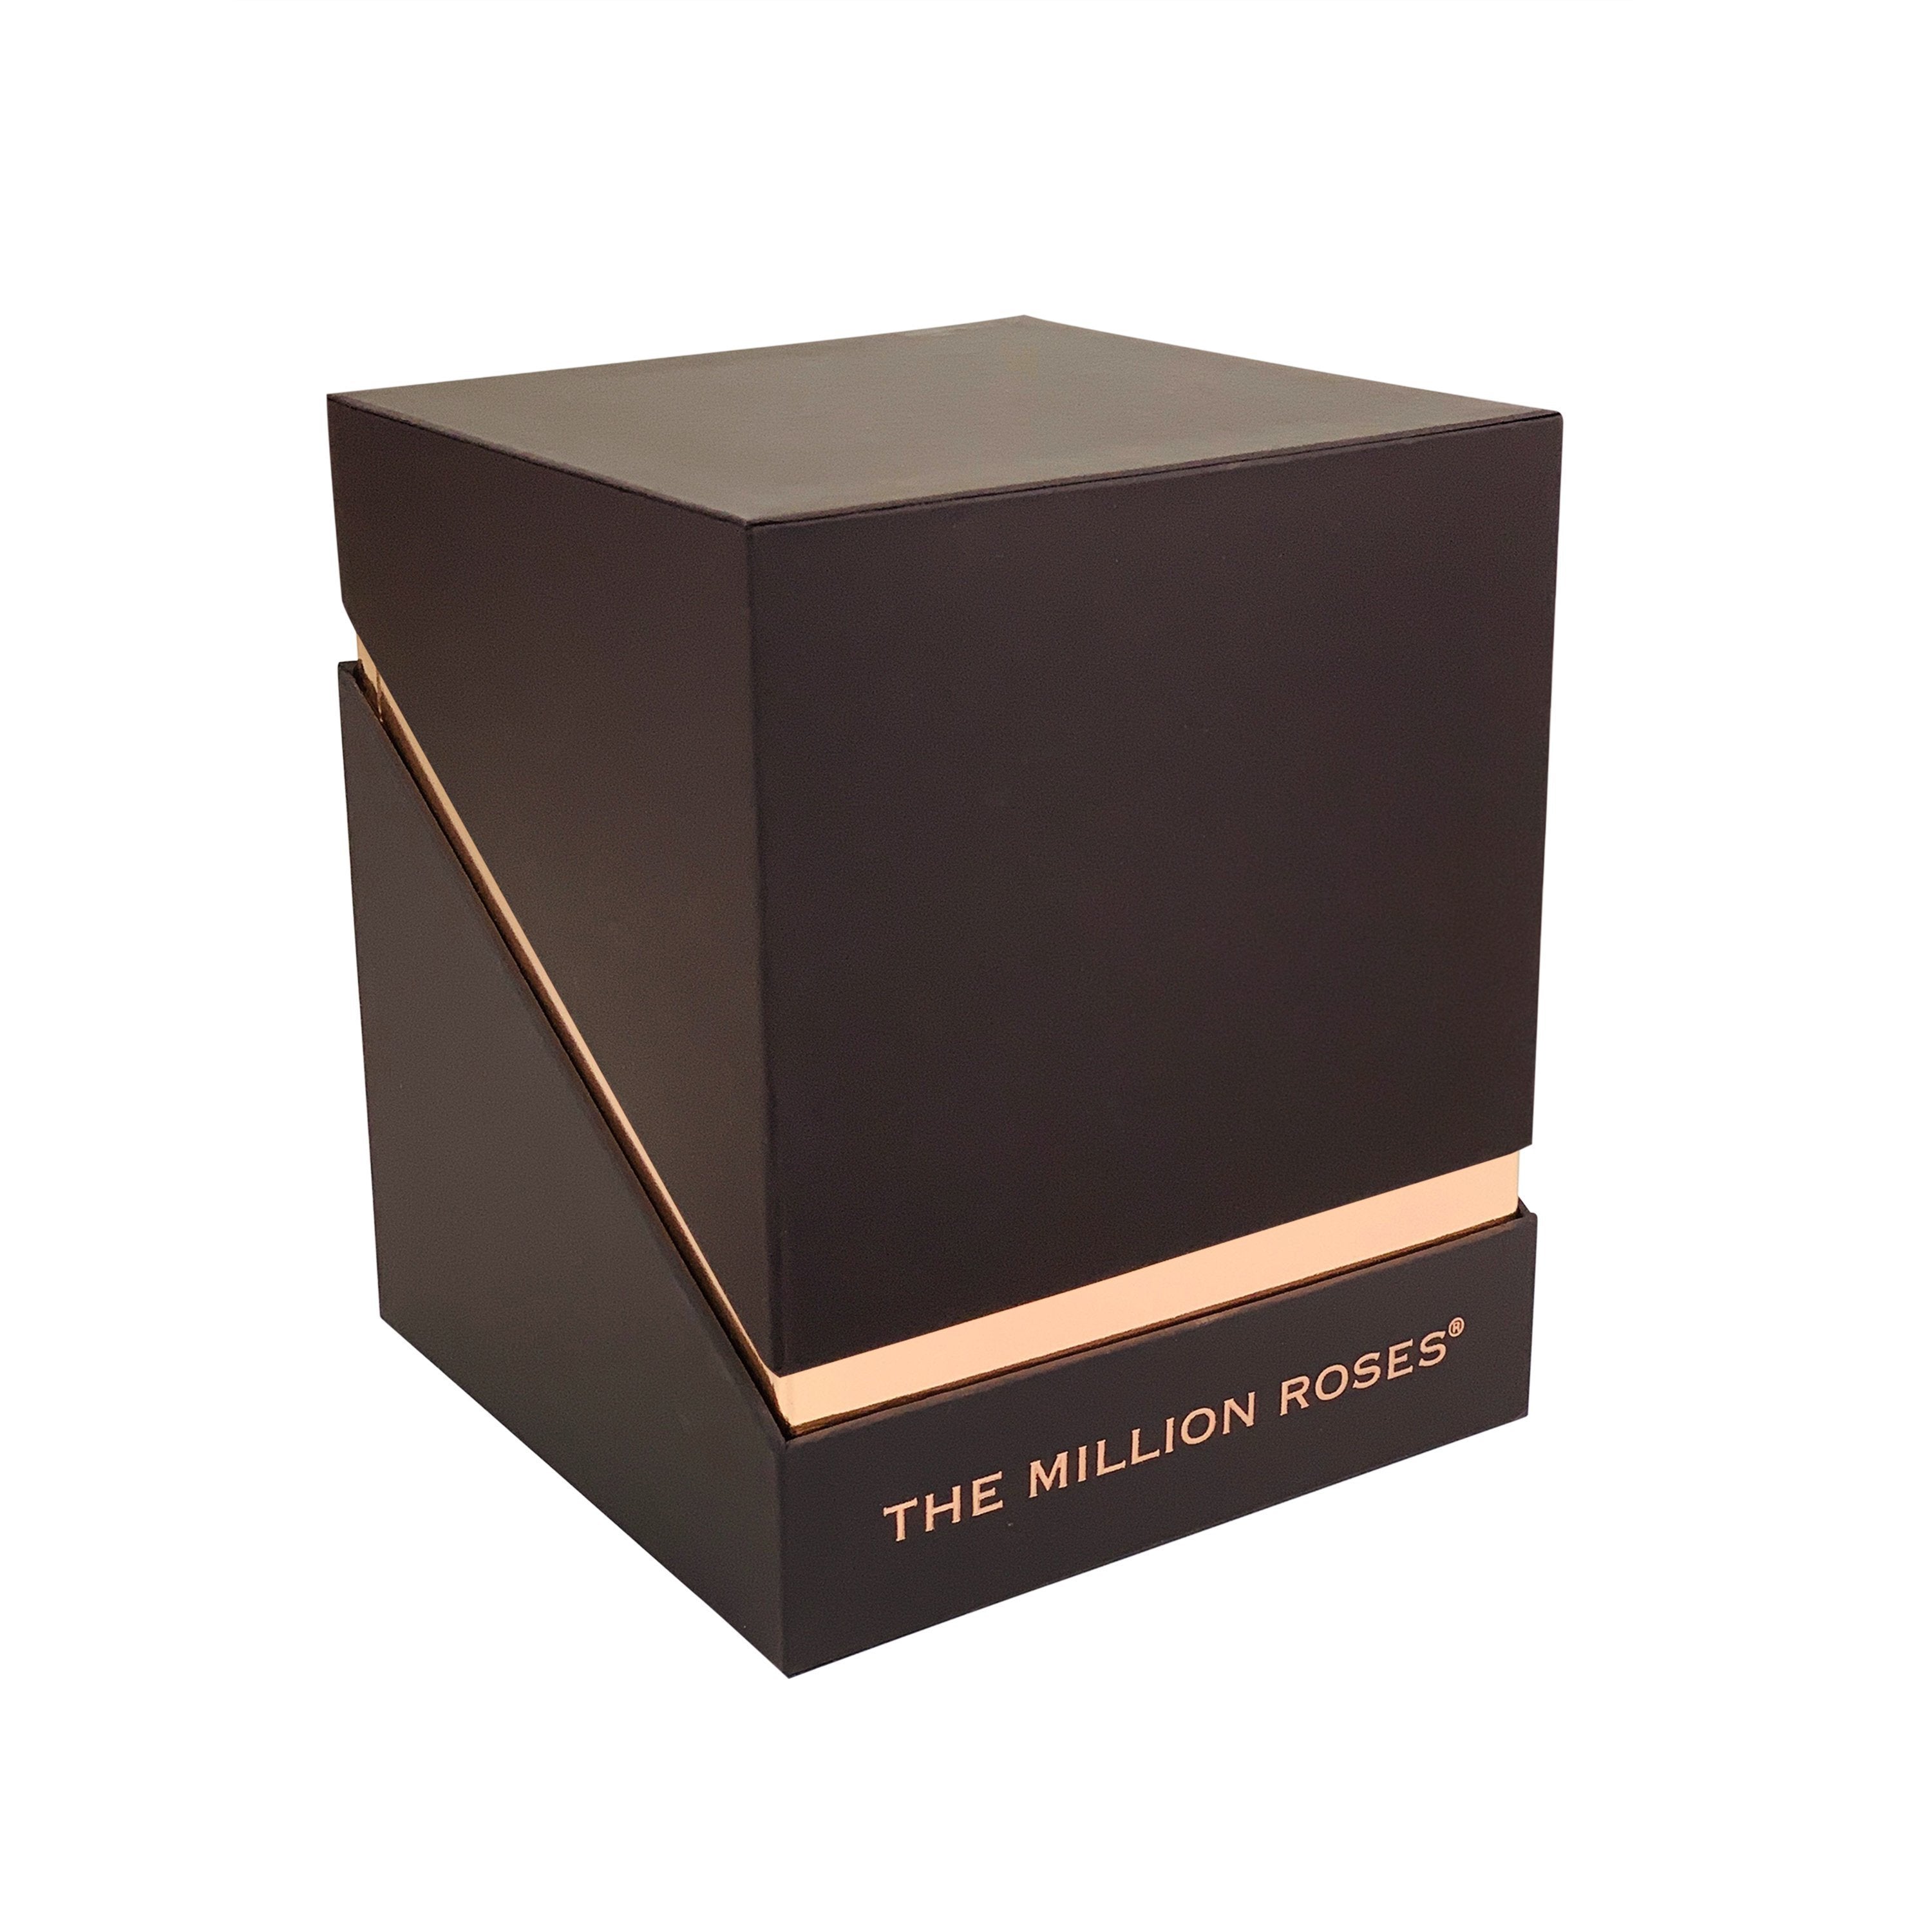 The Square - Coffee Box - Coral Roses